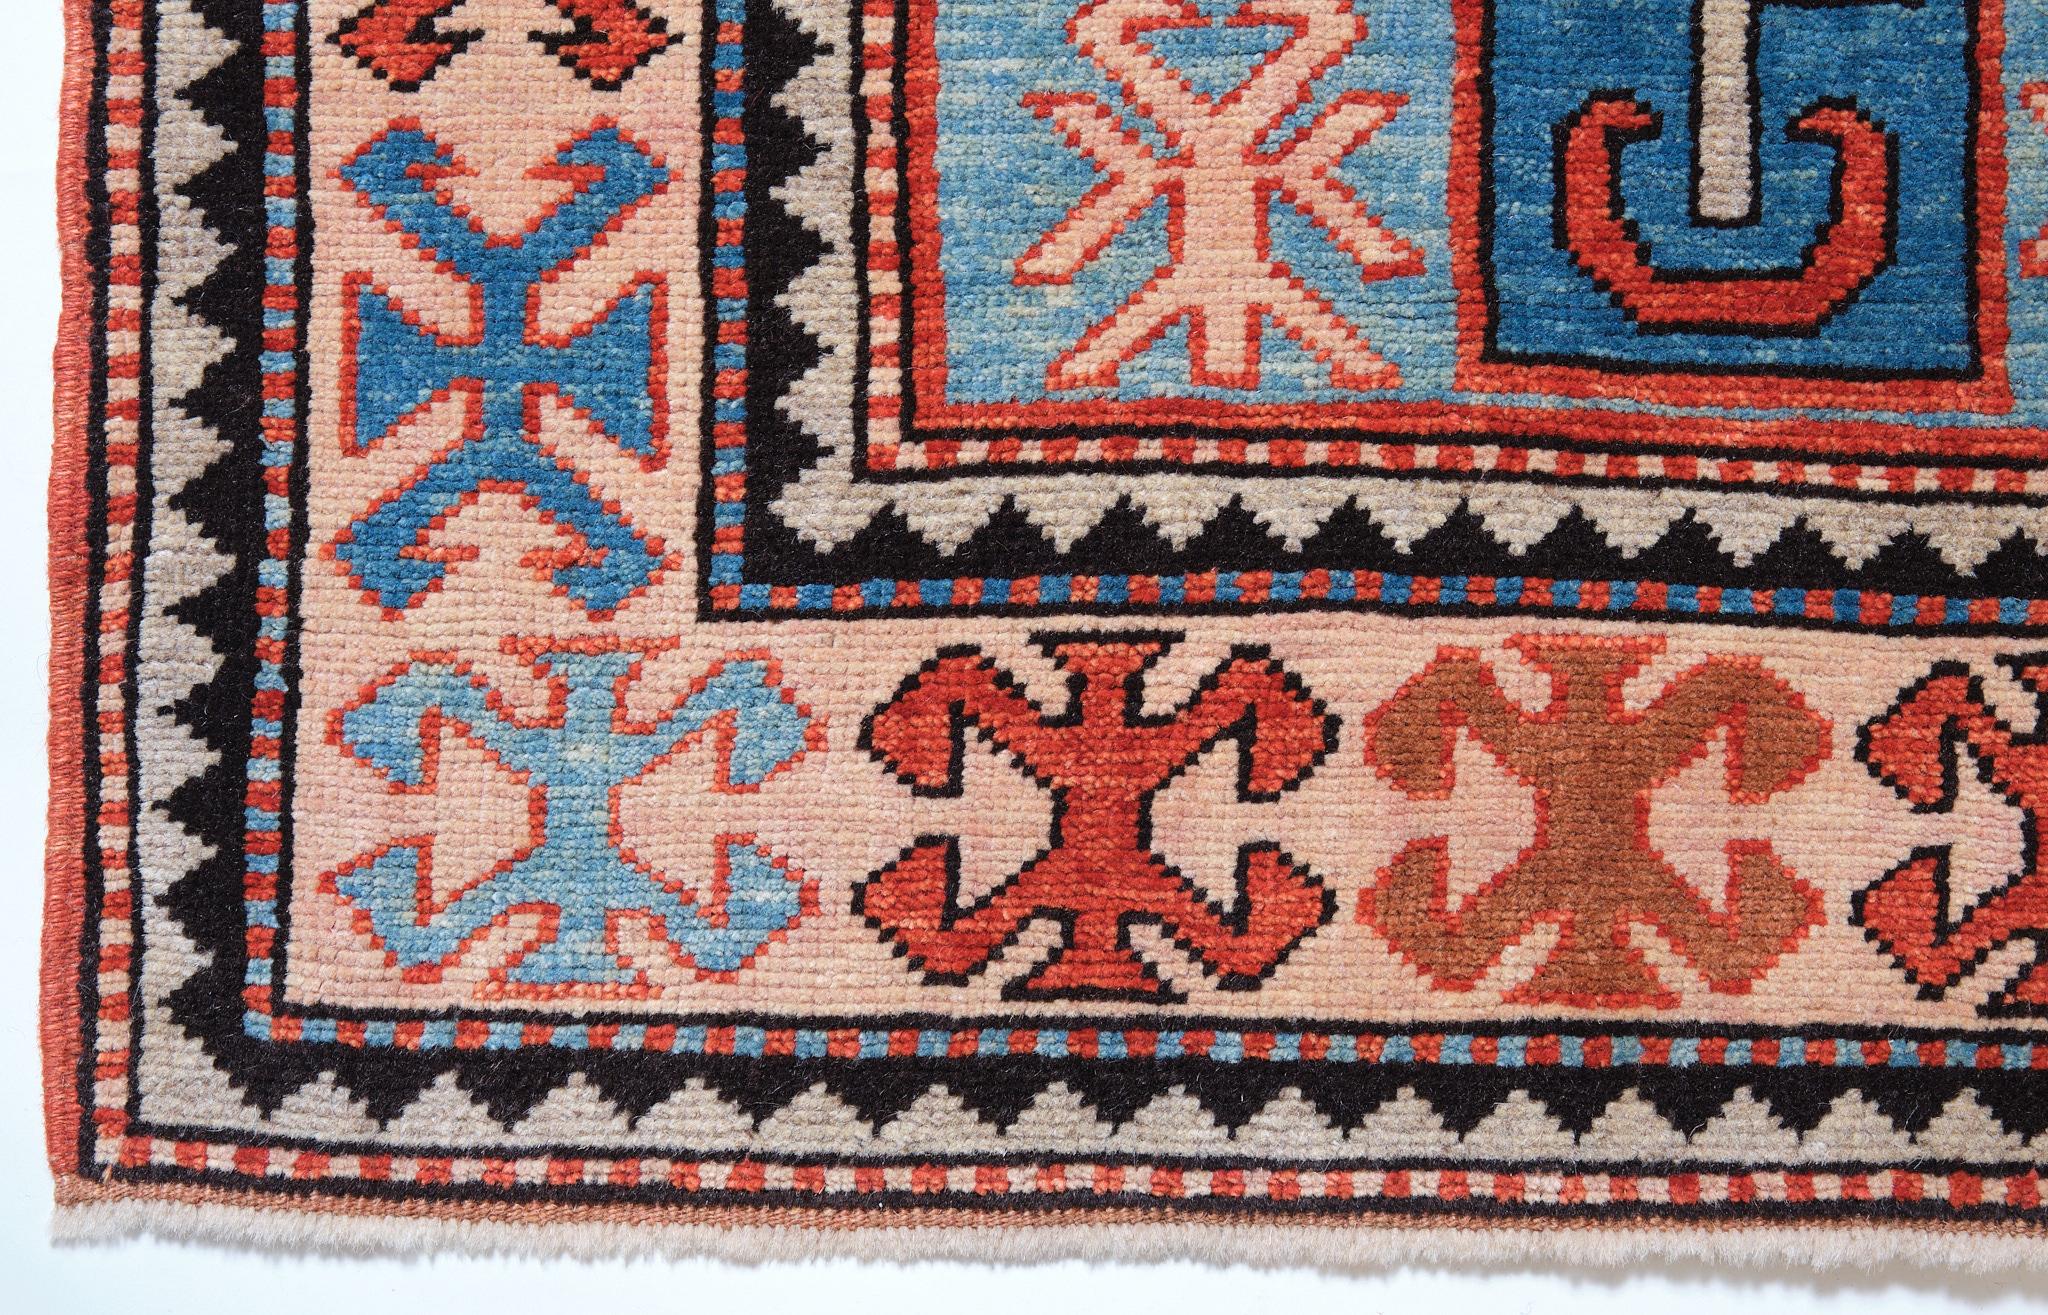 The source of the rug comes from the book Tapis du Caucase – Rugs of the Caucasus, Ian Bennett & Aziz Bassoul, The Nicholas Sursock Museum, Beirut, Lebanon 2003, nr.52 and Orient Star – A Carpet Collection, E. Heinrich Kirchheim, Hali Publications